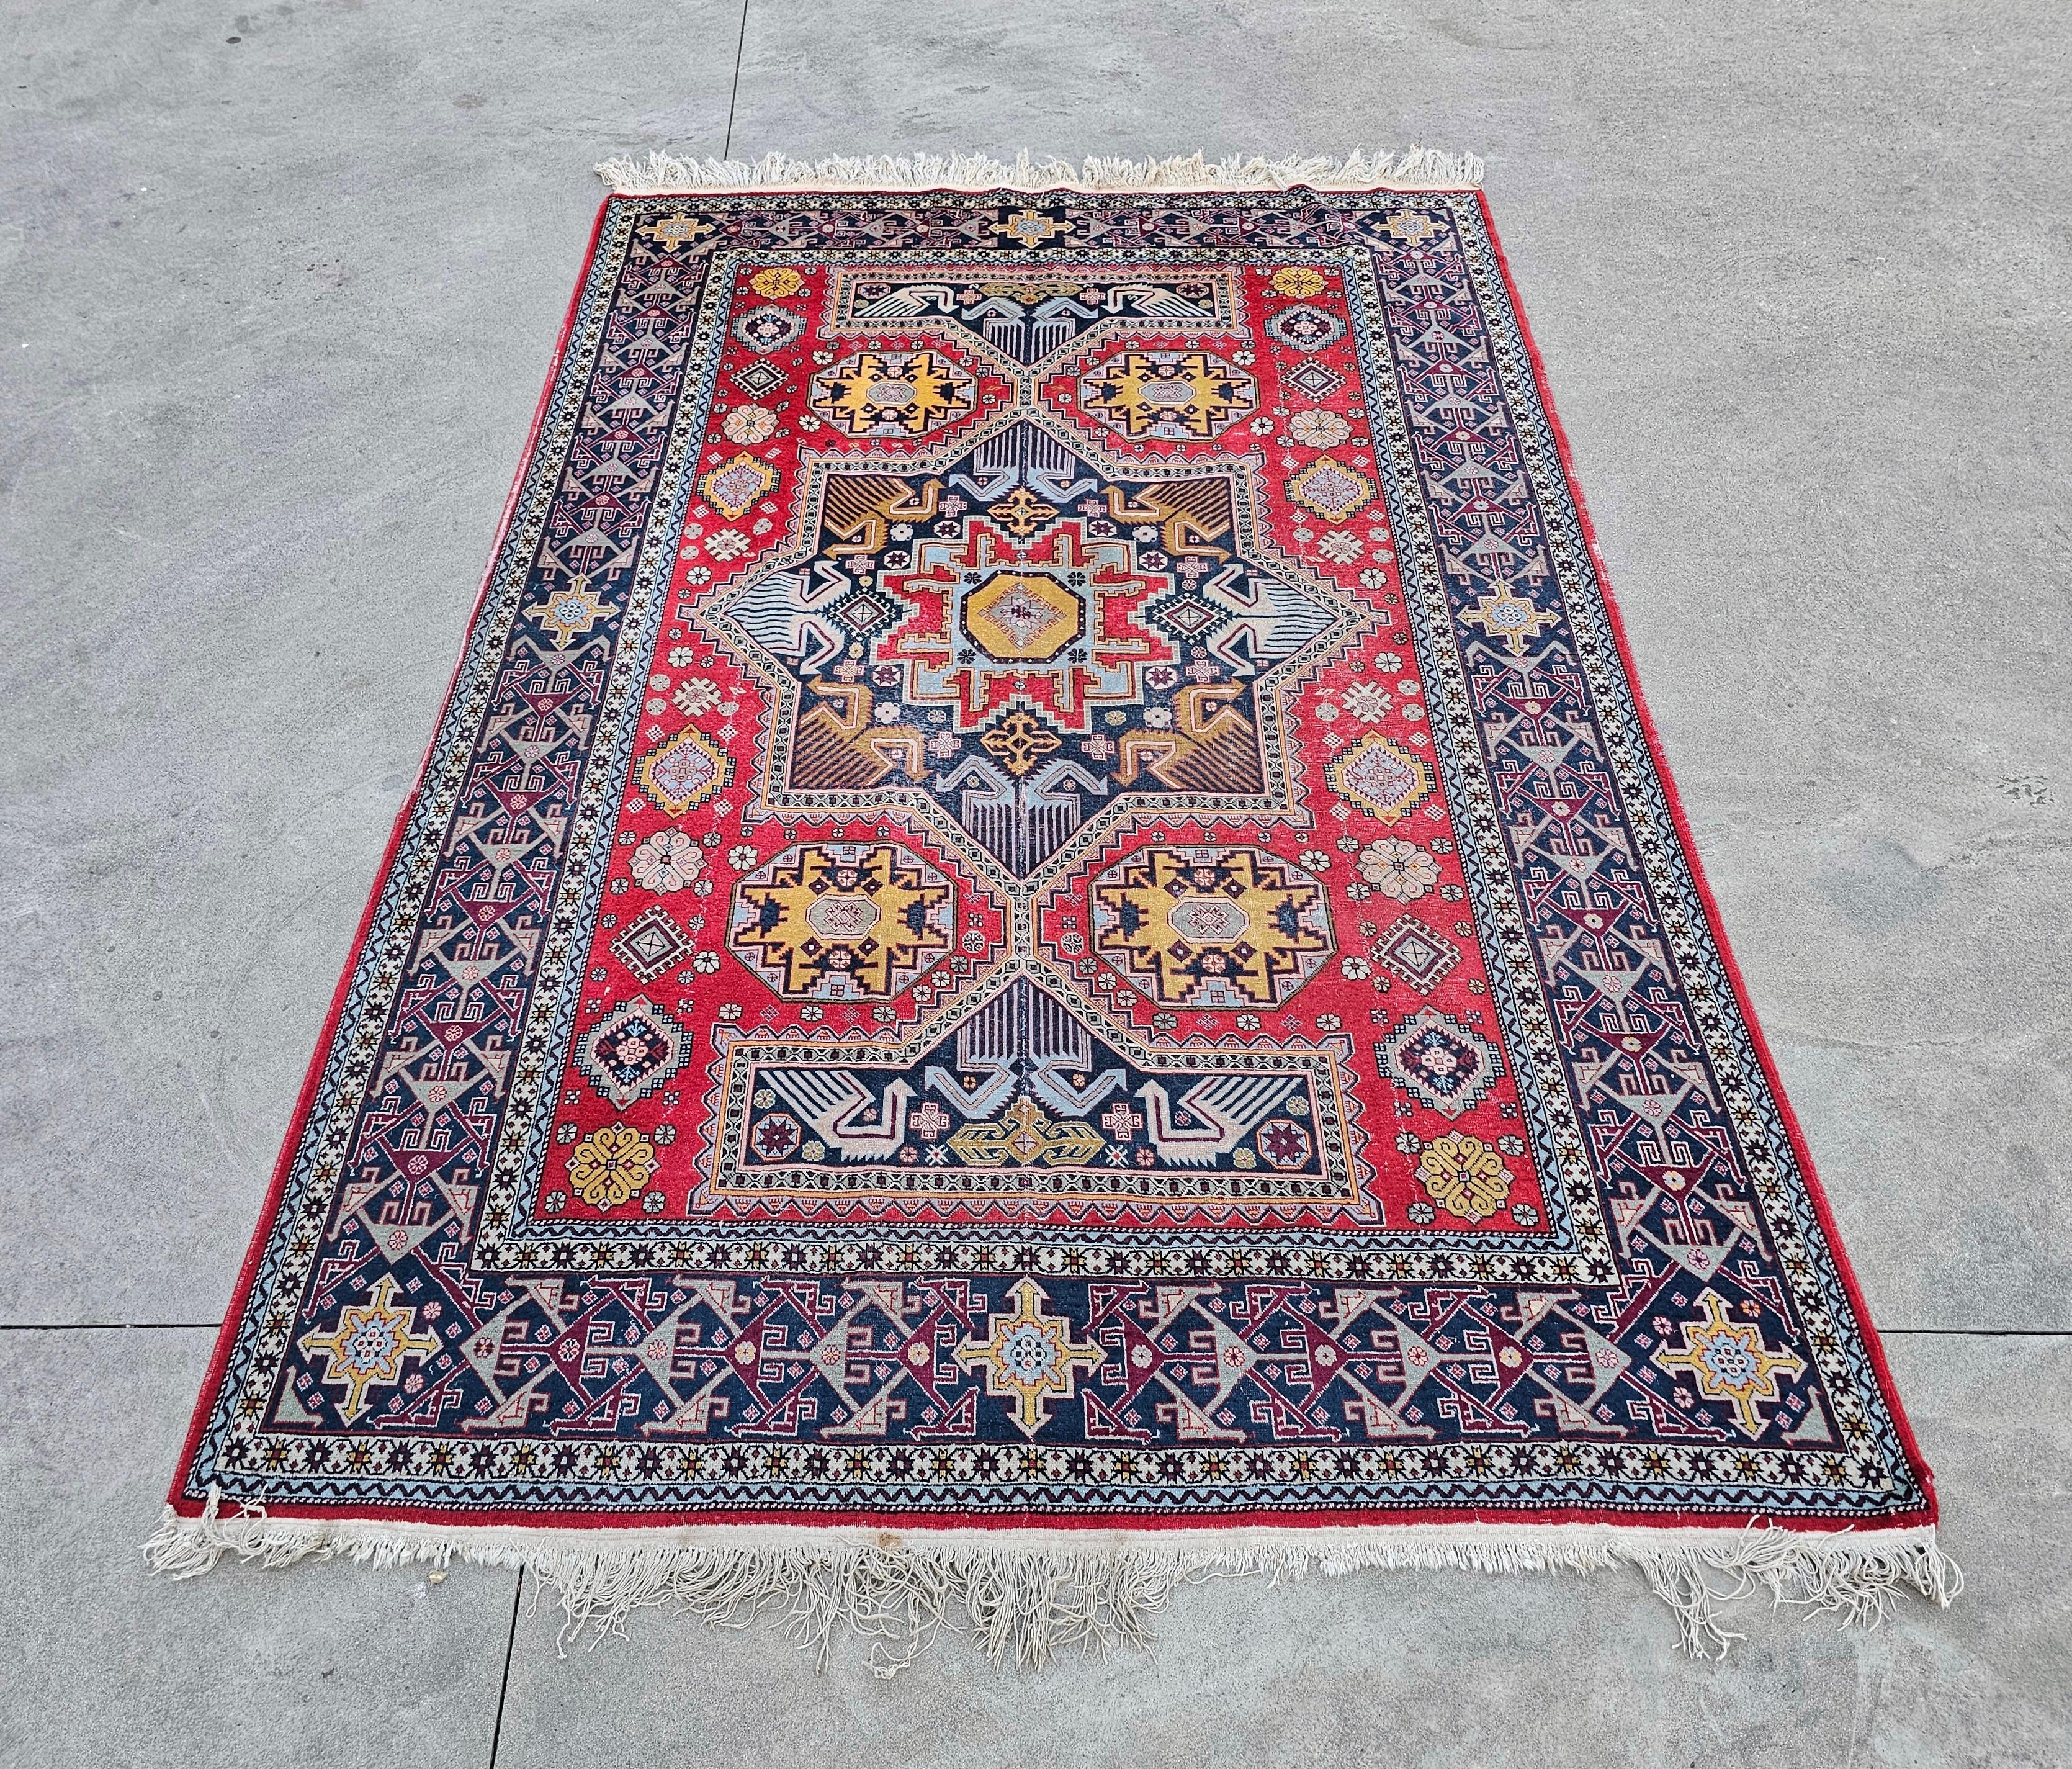 In this listing you will find an antique Kazak Rug with geometrical patterns and vibrant colours. It was hand-knotted in Afghan tribes around the first decade of the 20th century. The rug is made of 100% wool.

The rug is in good antique condition.